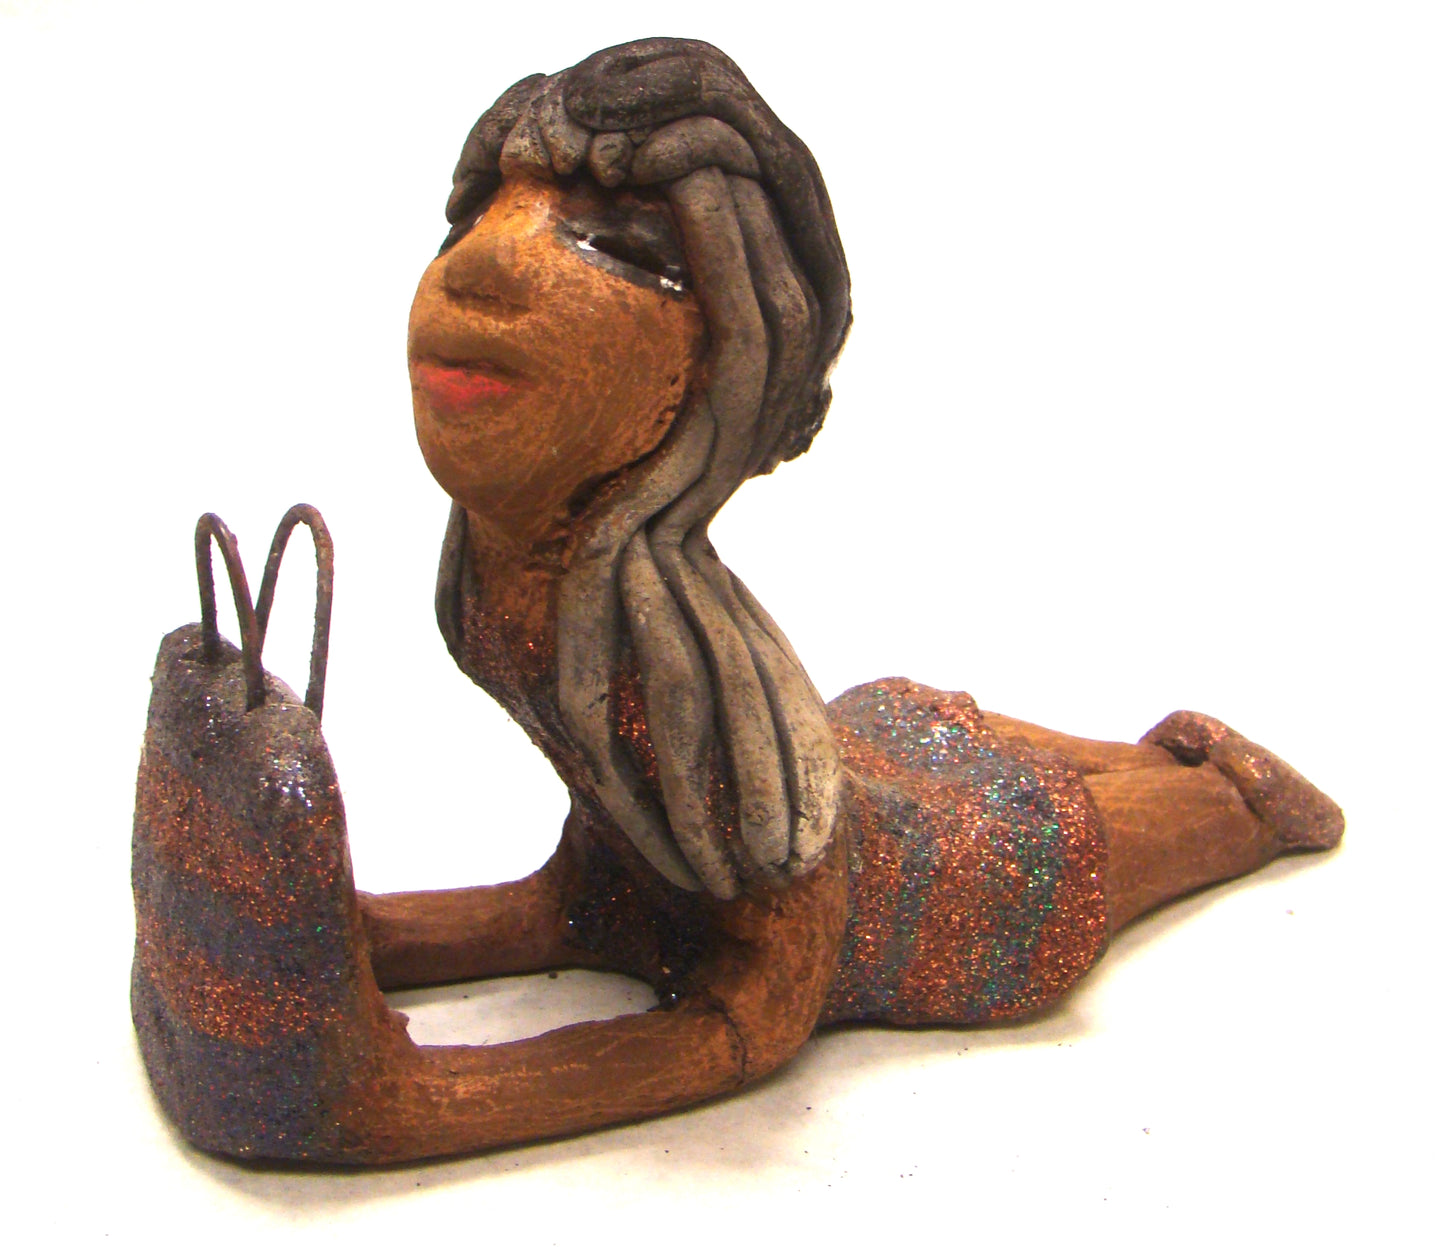 Wanda is Wishing and a Waiting !       Wanda stands 6" x 2.5" x 6" and weighs 11 ozs.     She has a lovely honey brown complexion with smokey gray clay hair.     Wanda's copper and green striped dress matches her bag.     Her long loving arms are outstretched with bag in hand.  Wanda is wishin and a waiting on You!